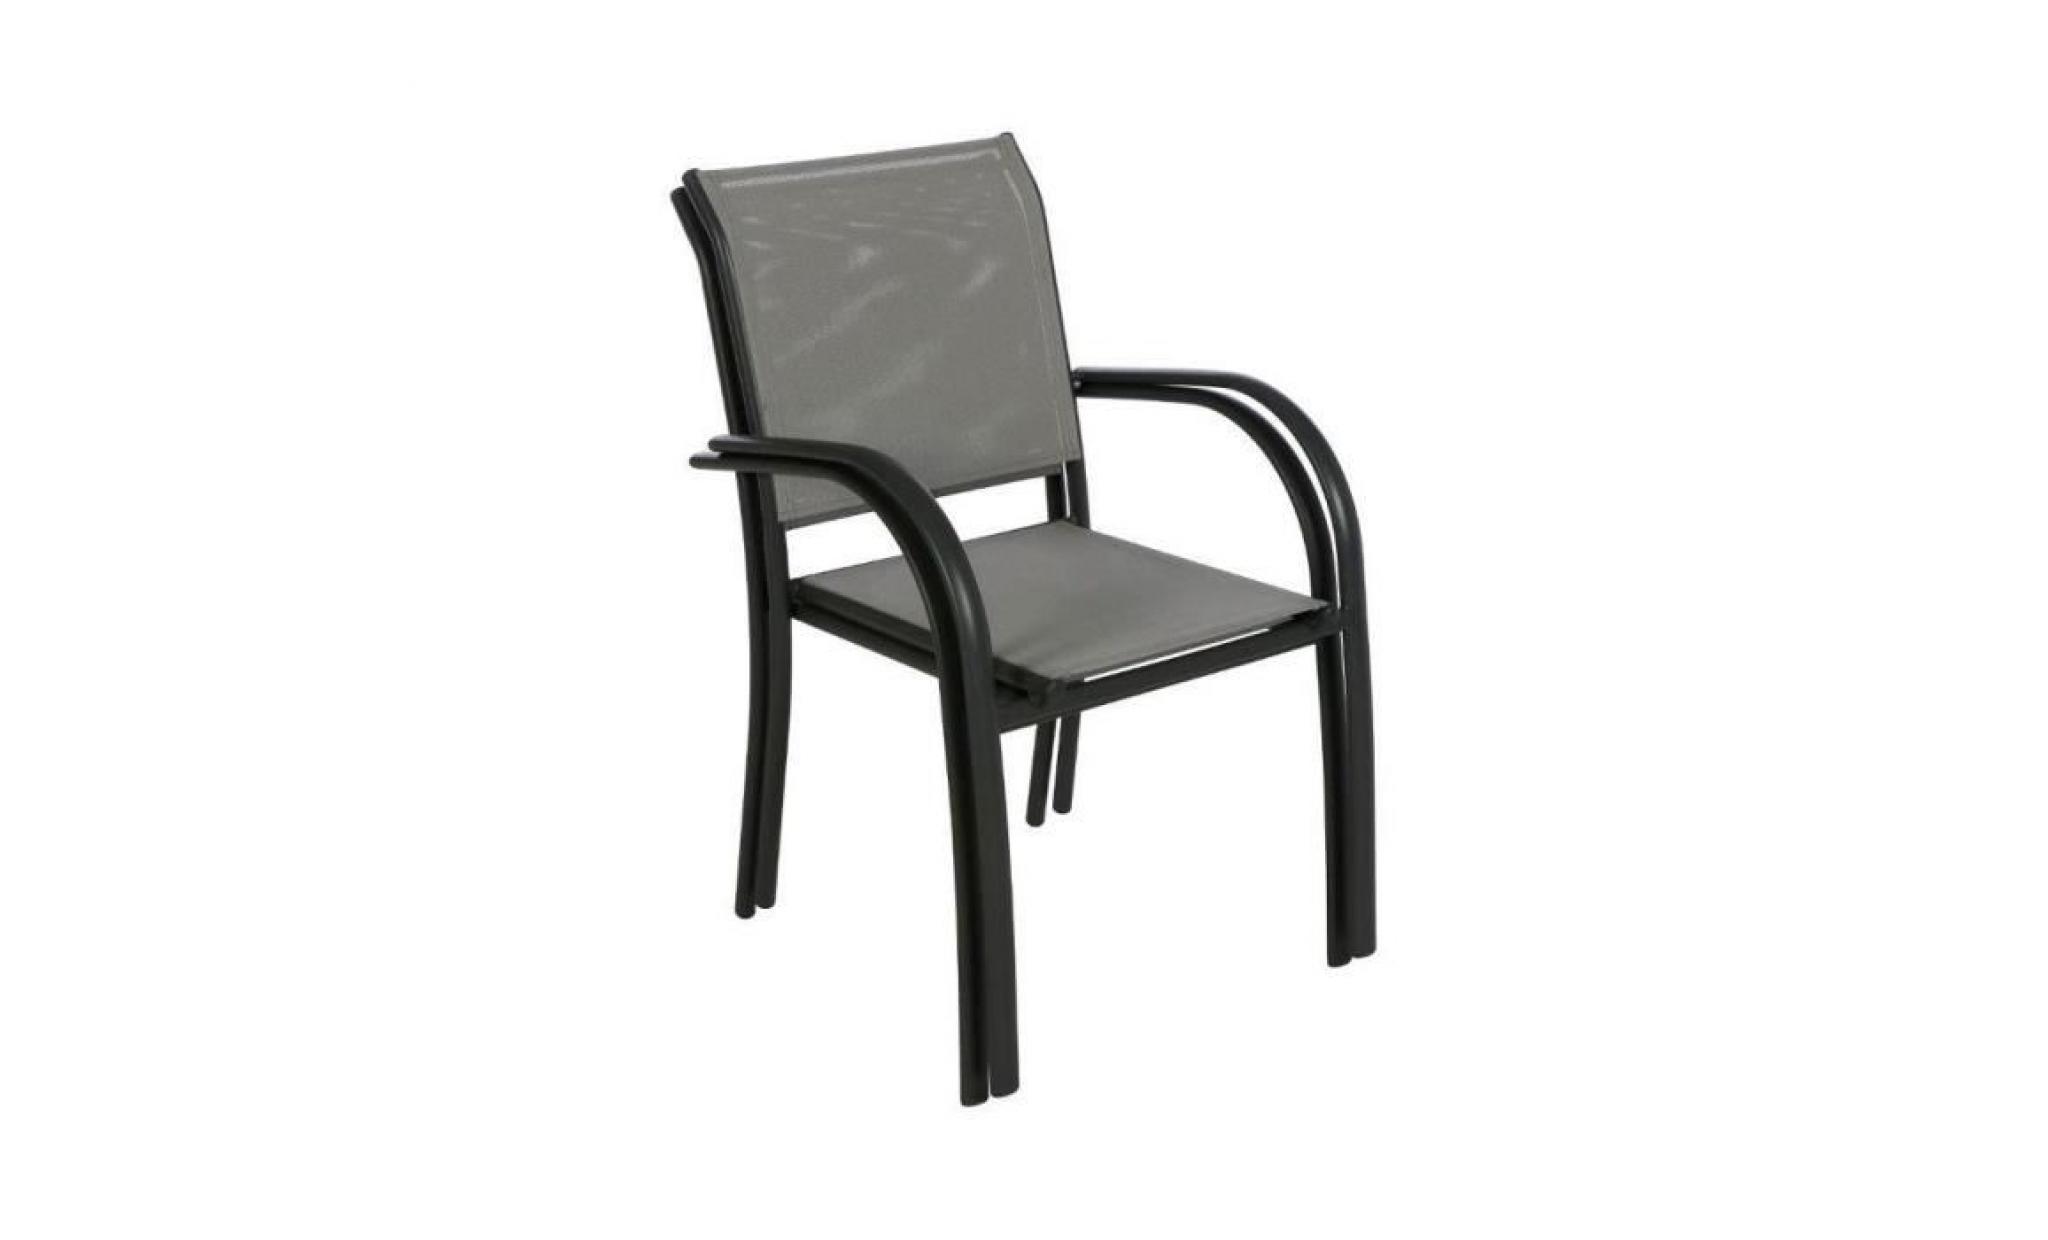 fauteuil piazza hesperide empilable graphite/galet pas cher